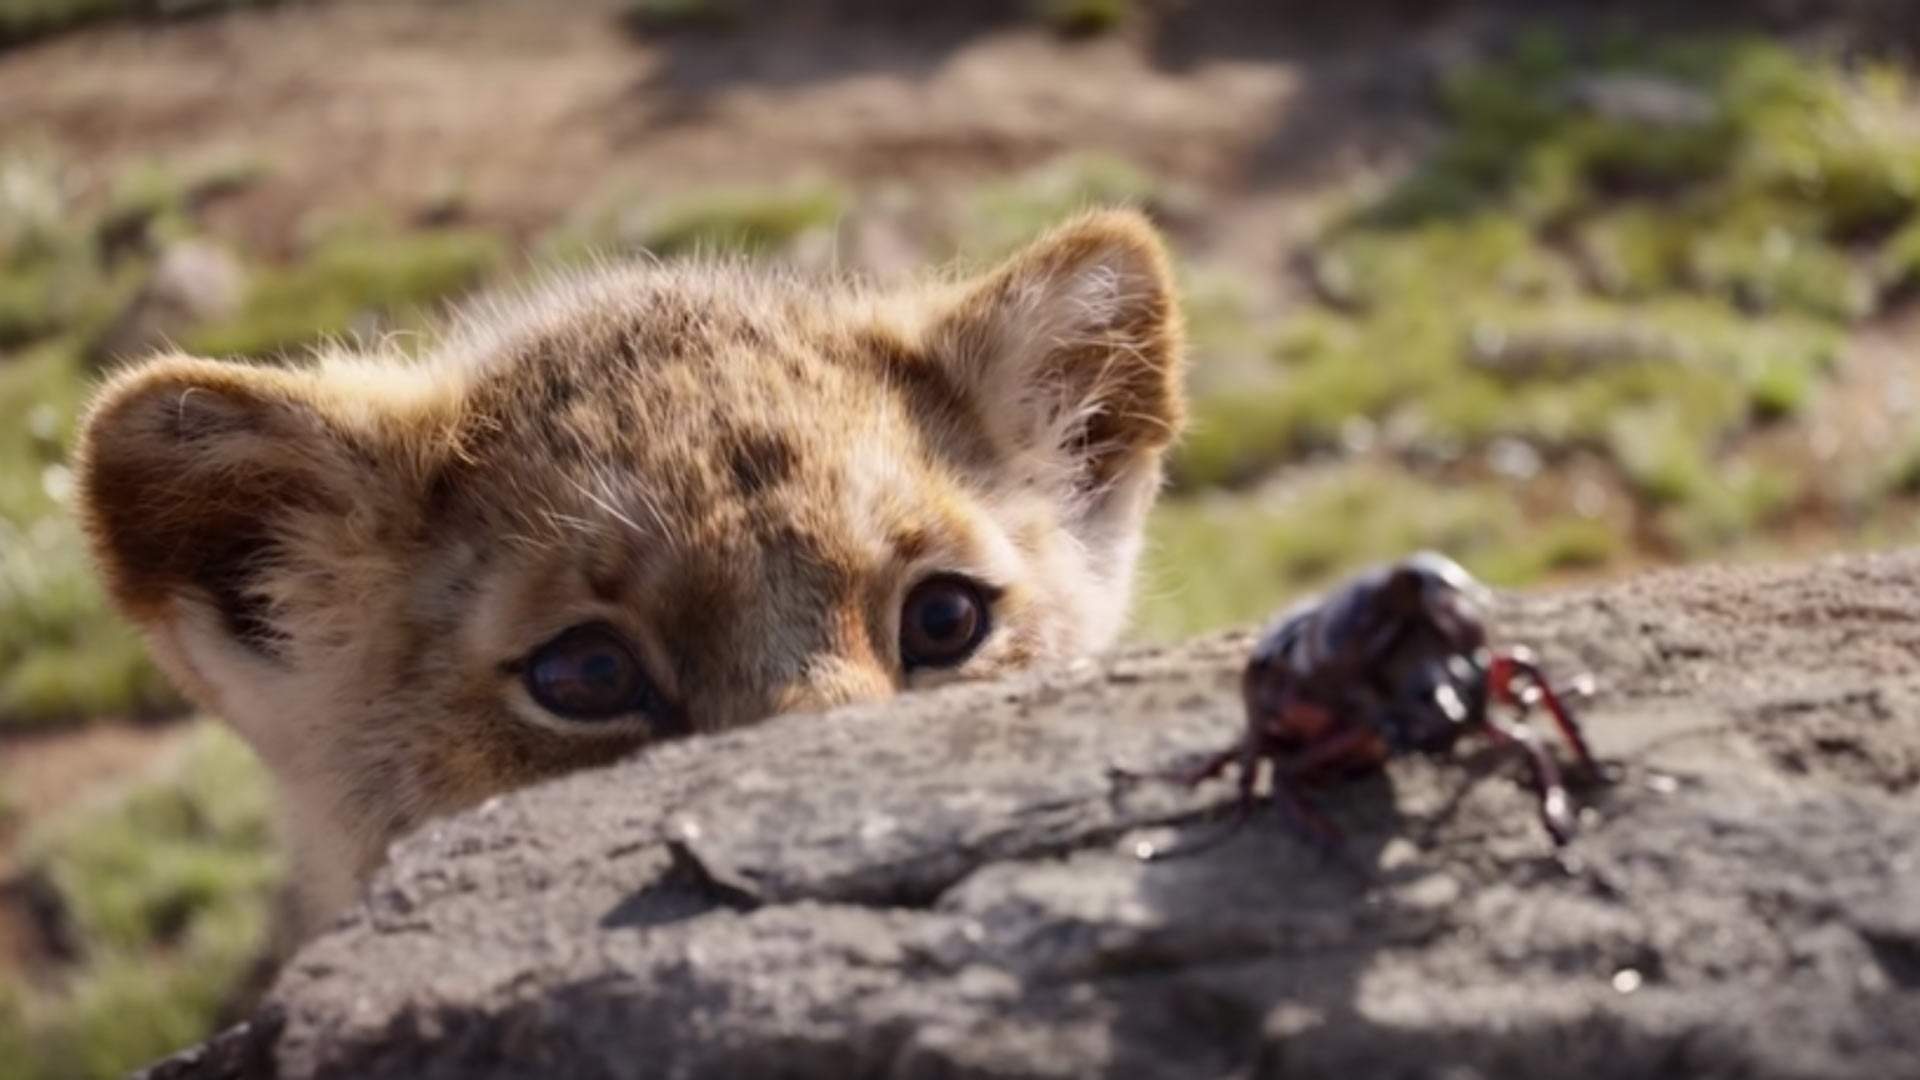 The Official Trailer for the Live-Action 'Lion King' Has Dropped So Get Ready to Feel Mighty Nostalgic